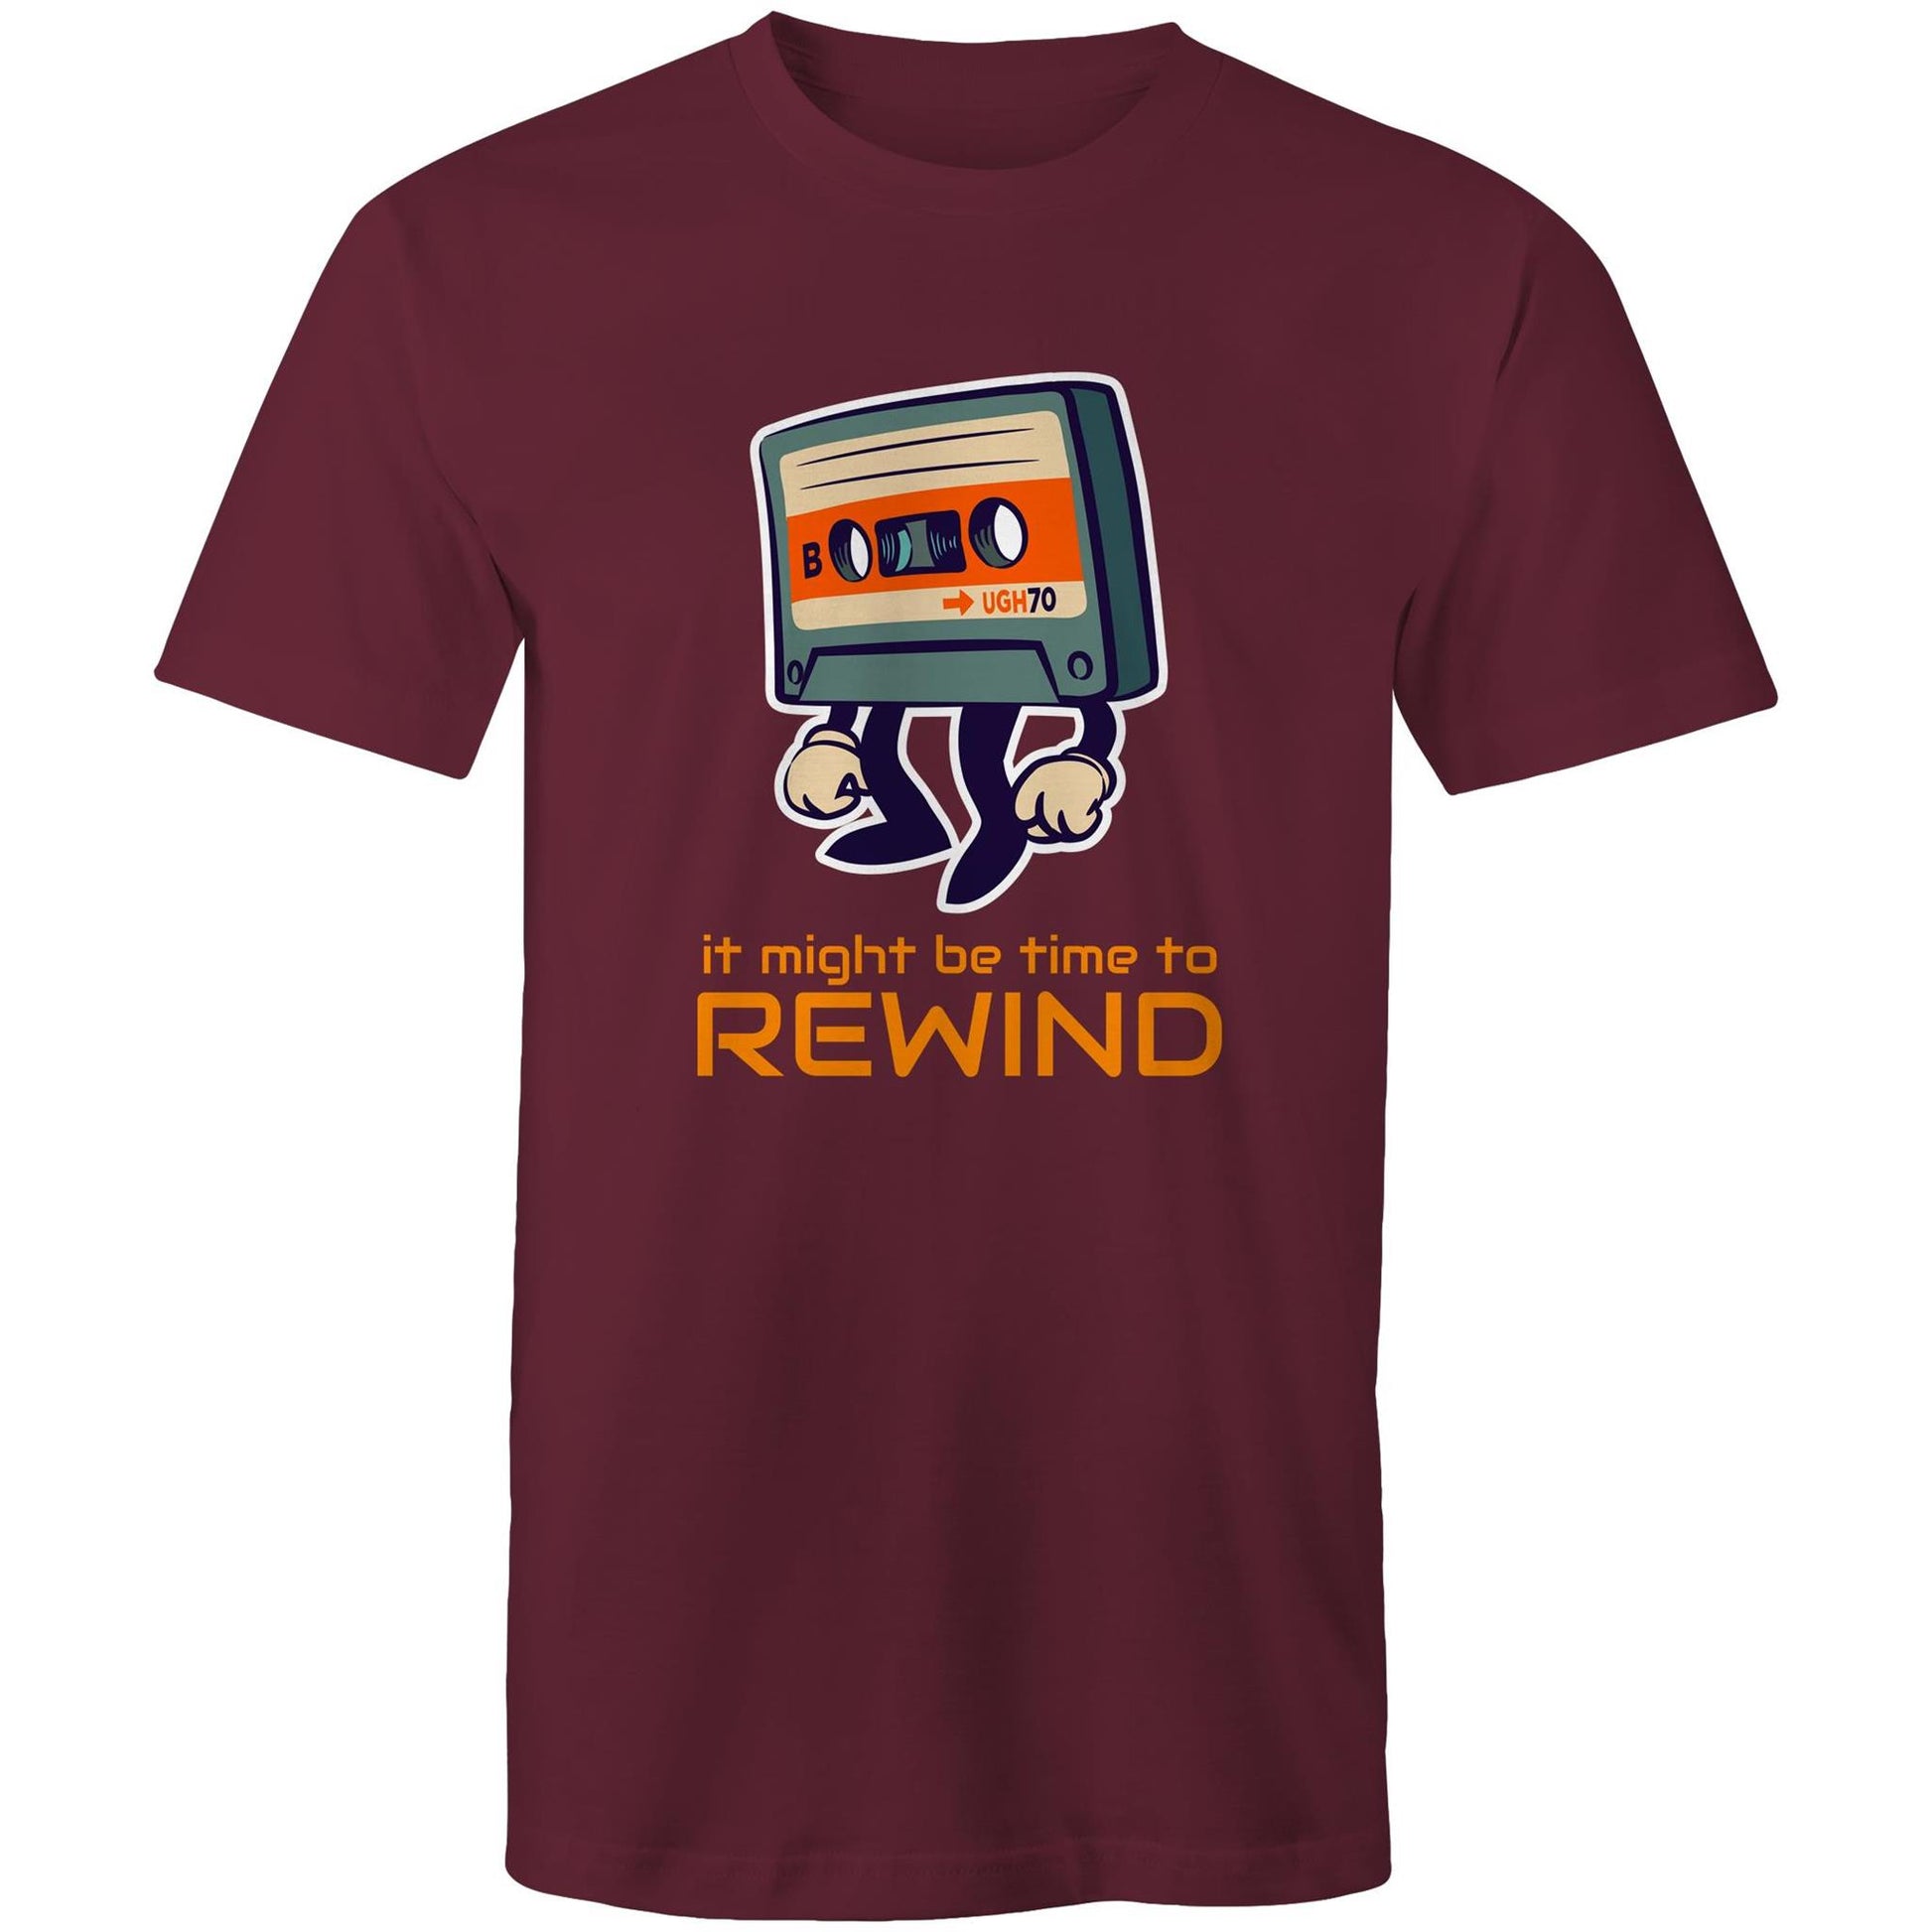 It Might Be Time To Rewind - Mens T-Shirt Burgundy Mens T-shirt Music Retro